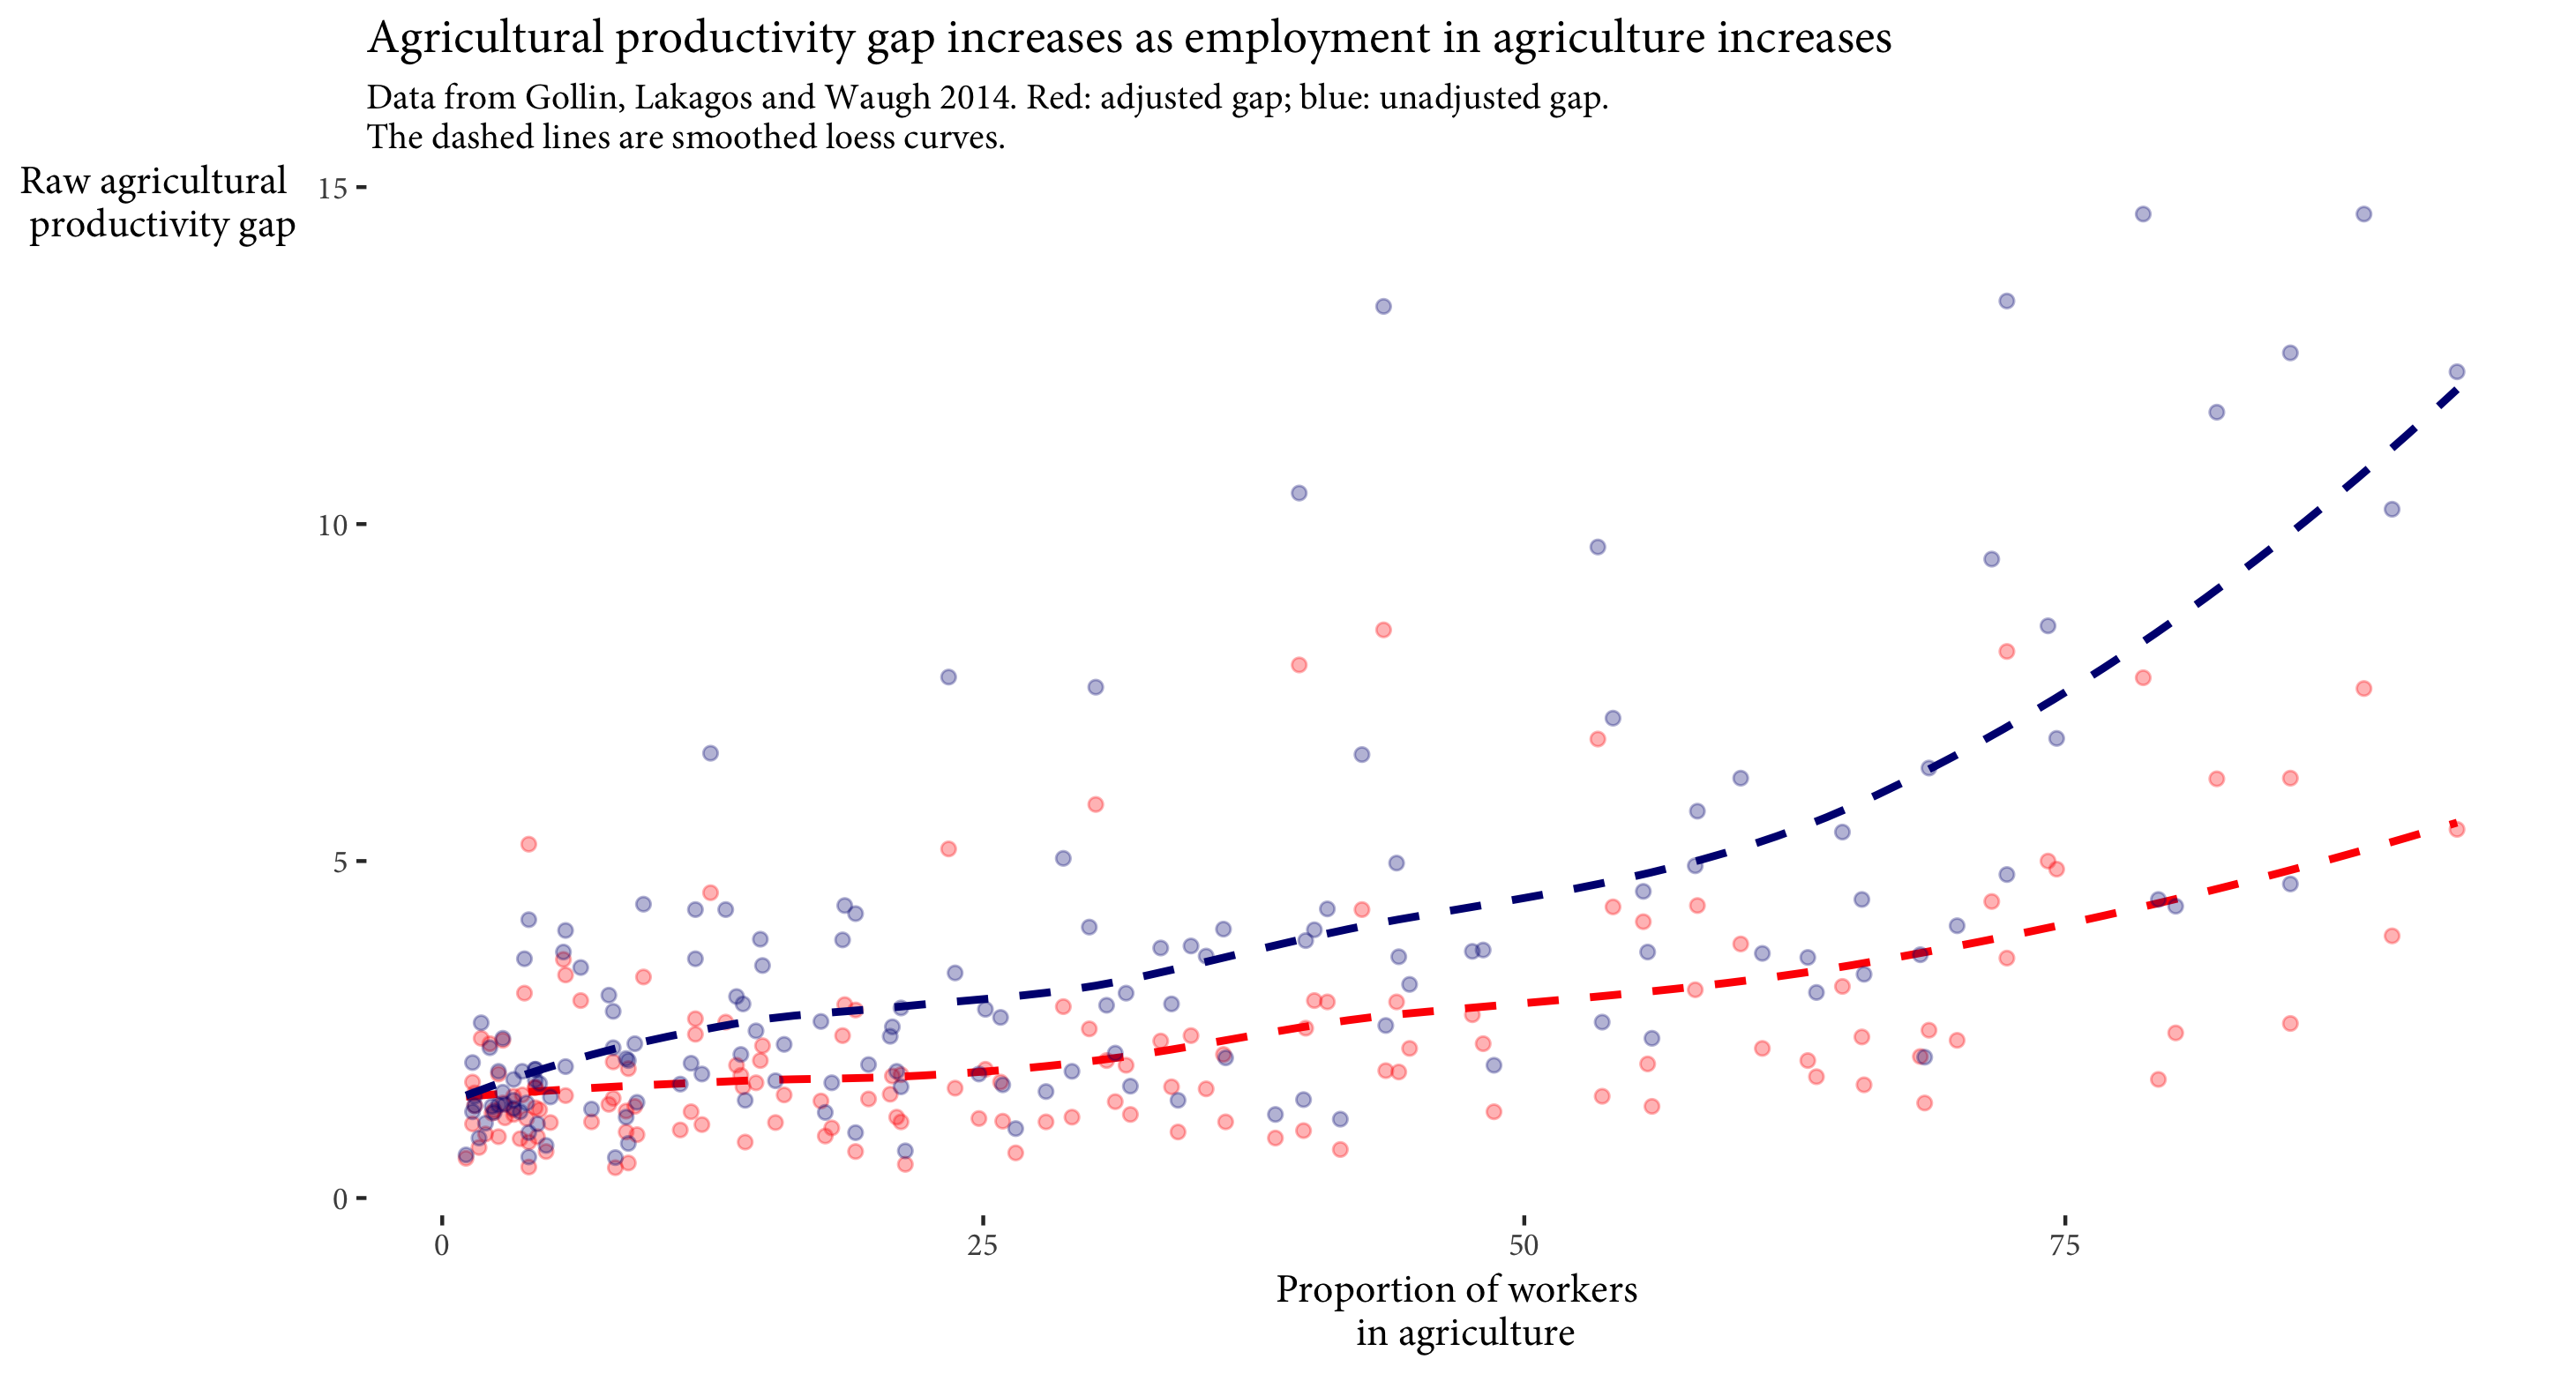 The agricultural productivity gap is strongly correlated with the share of the population in agriculture